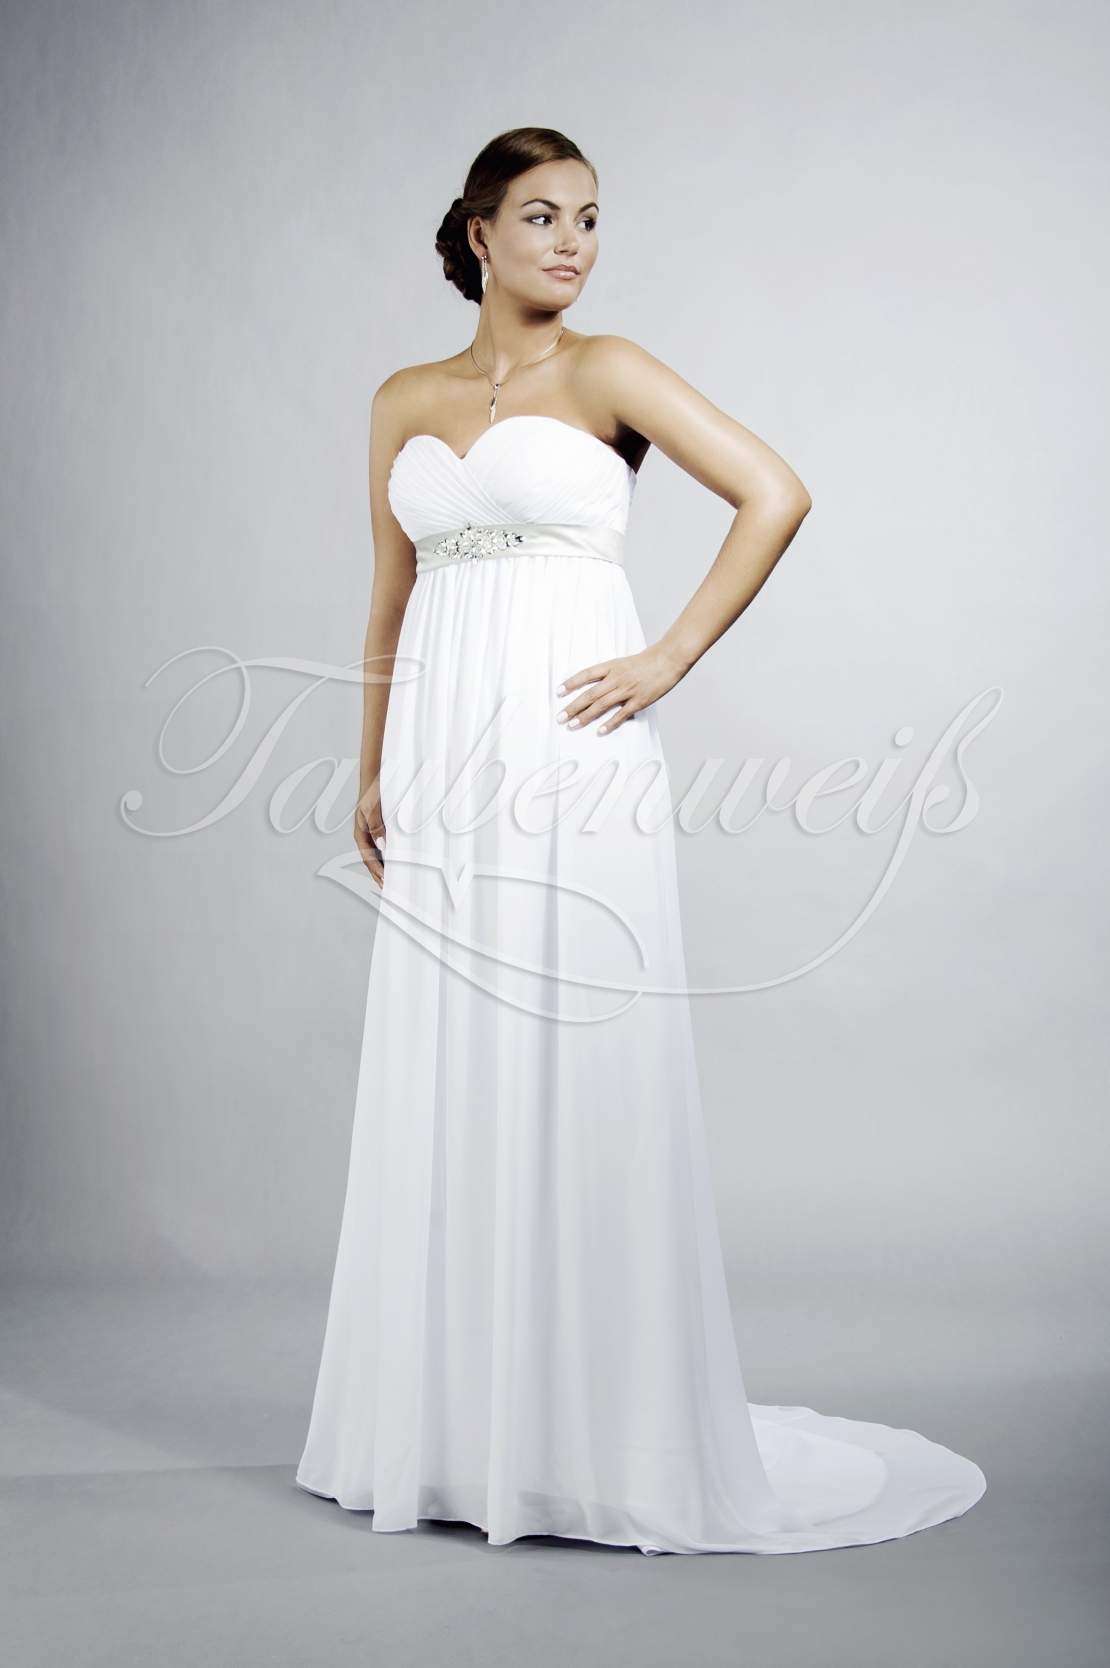 Wedding Dress Tw0192b Our Empire Style For The Pregnant Bride